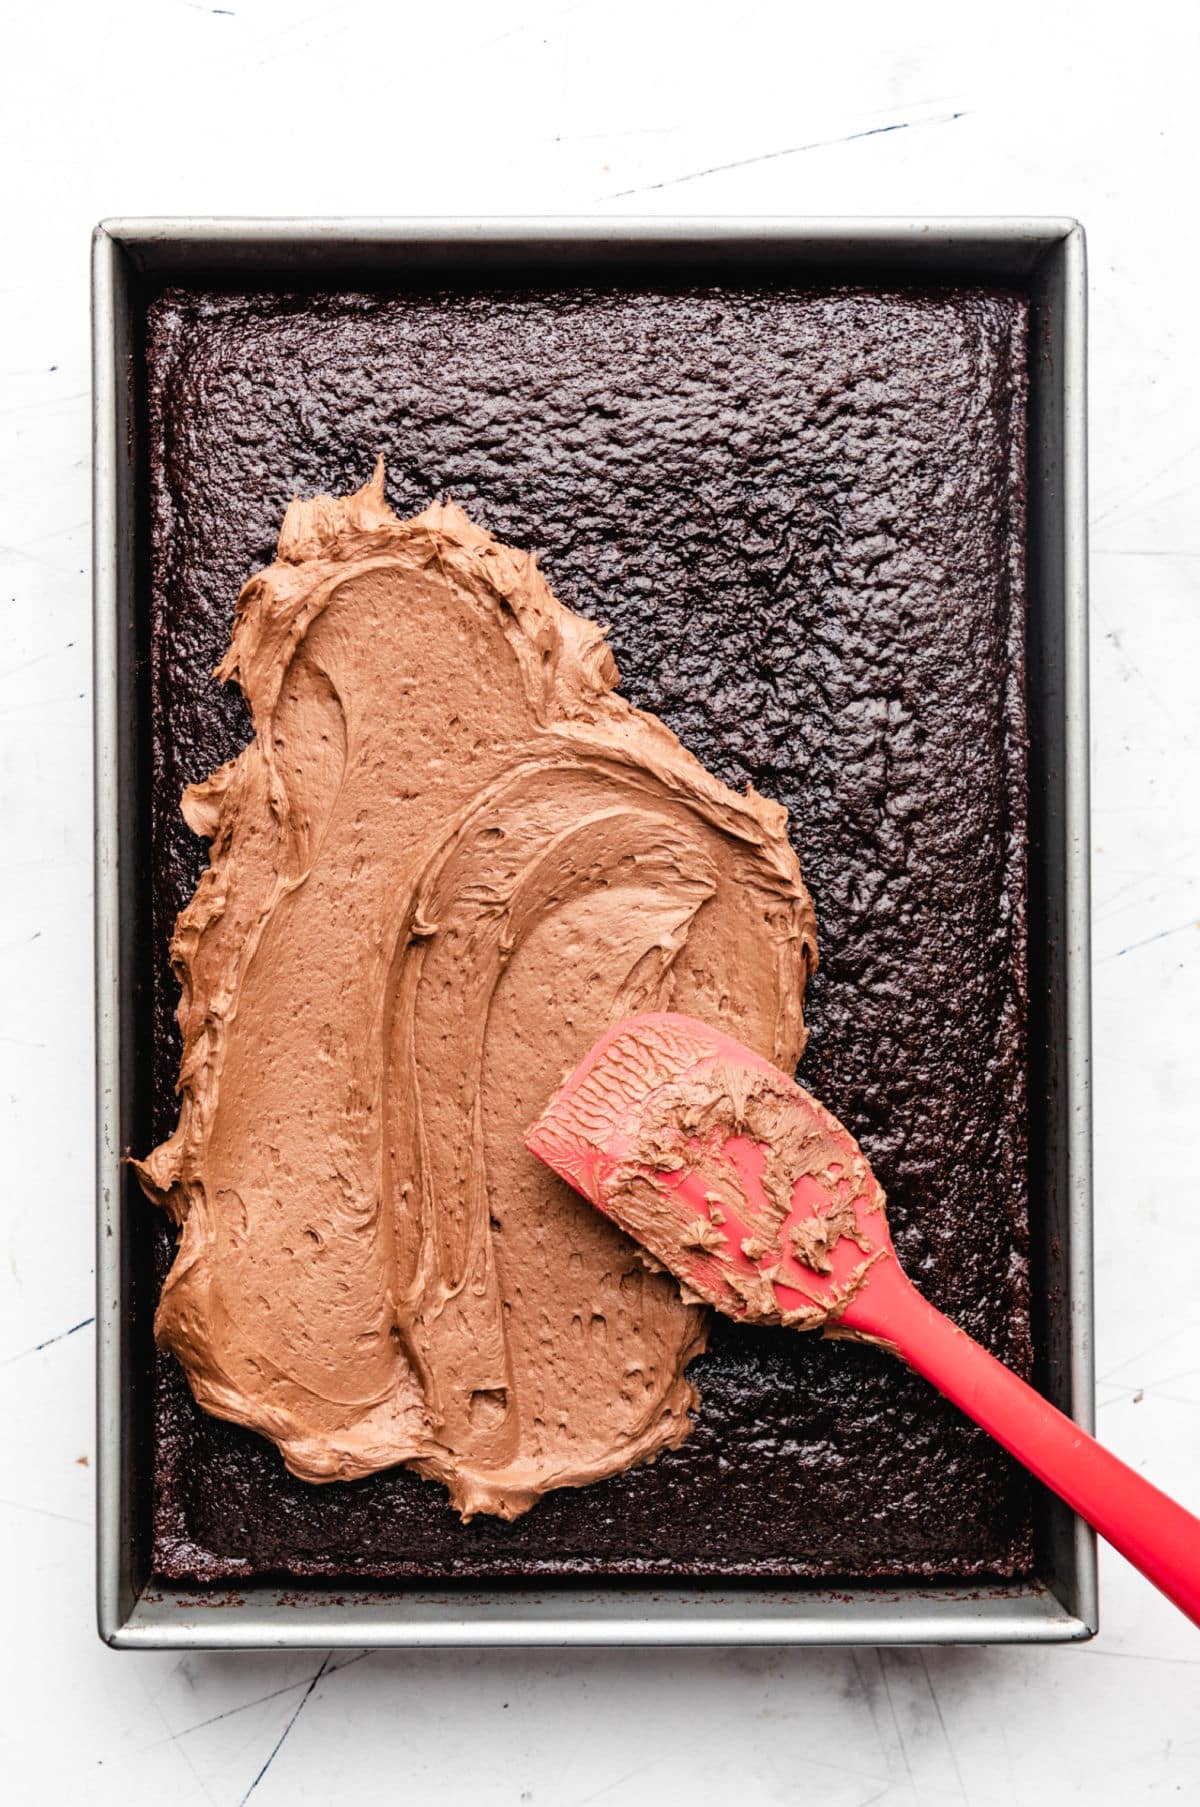 A red spatula spreading chocolate buttercream frosting on a chocolate sheet cake.